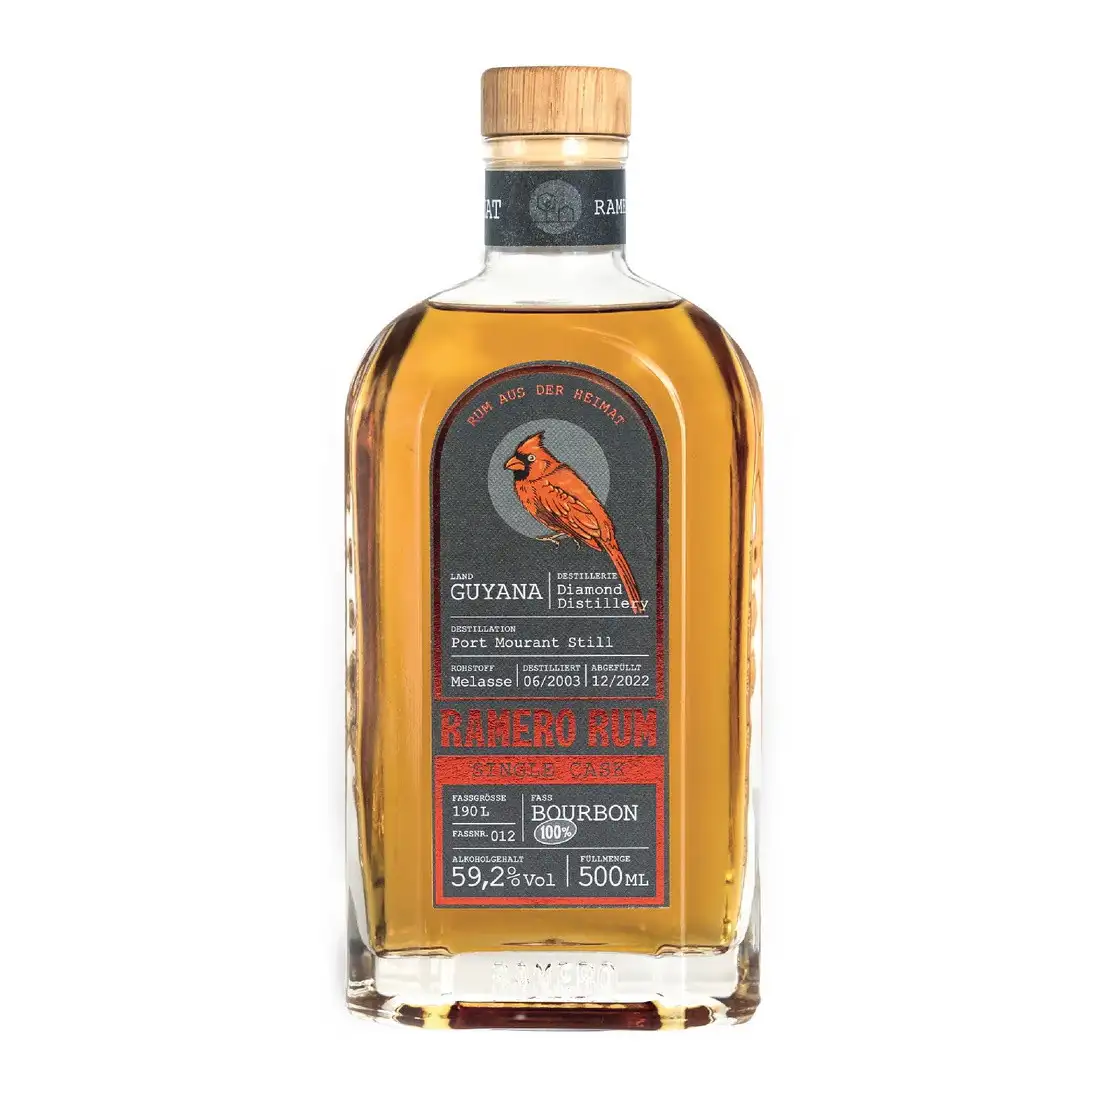 Image of the front of the bottle of the rum Ramero Rum Single Cask Bourbon PM